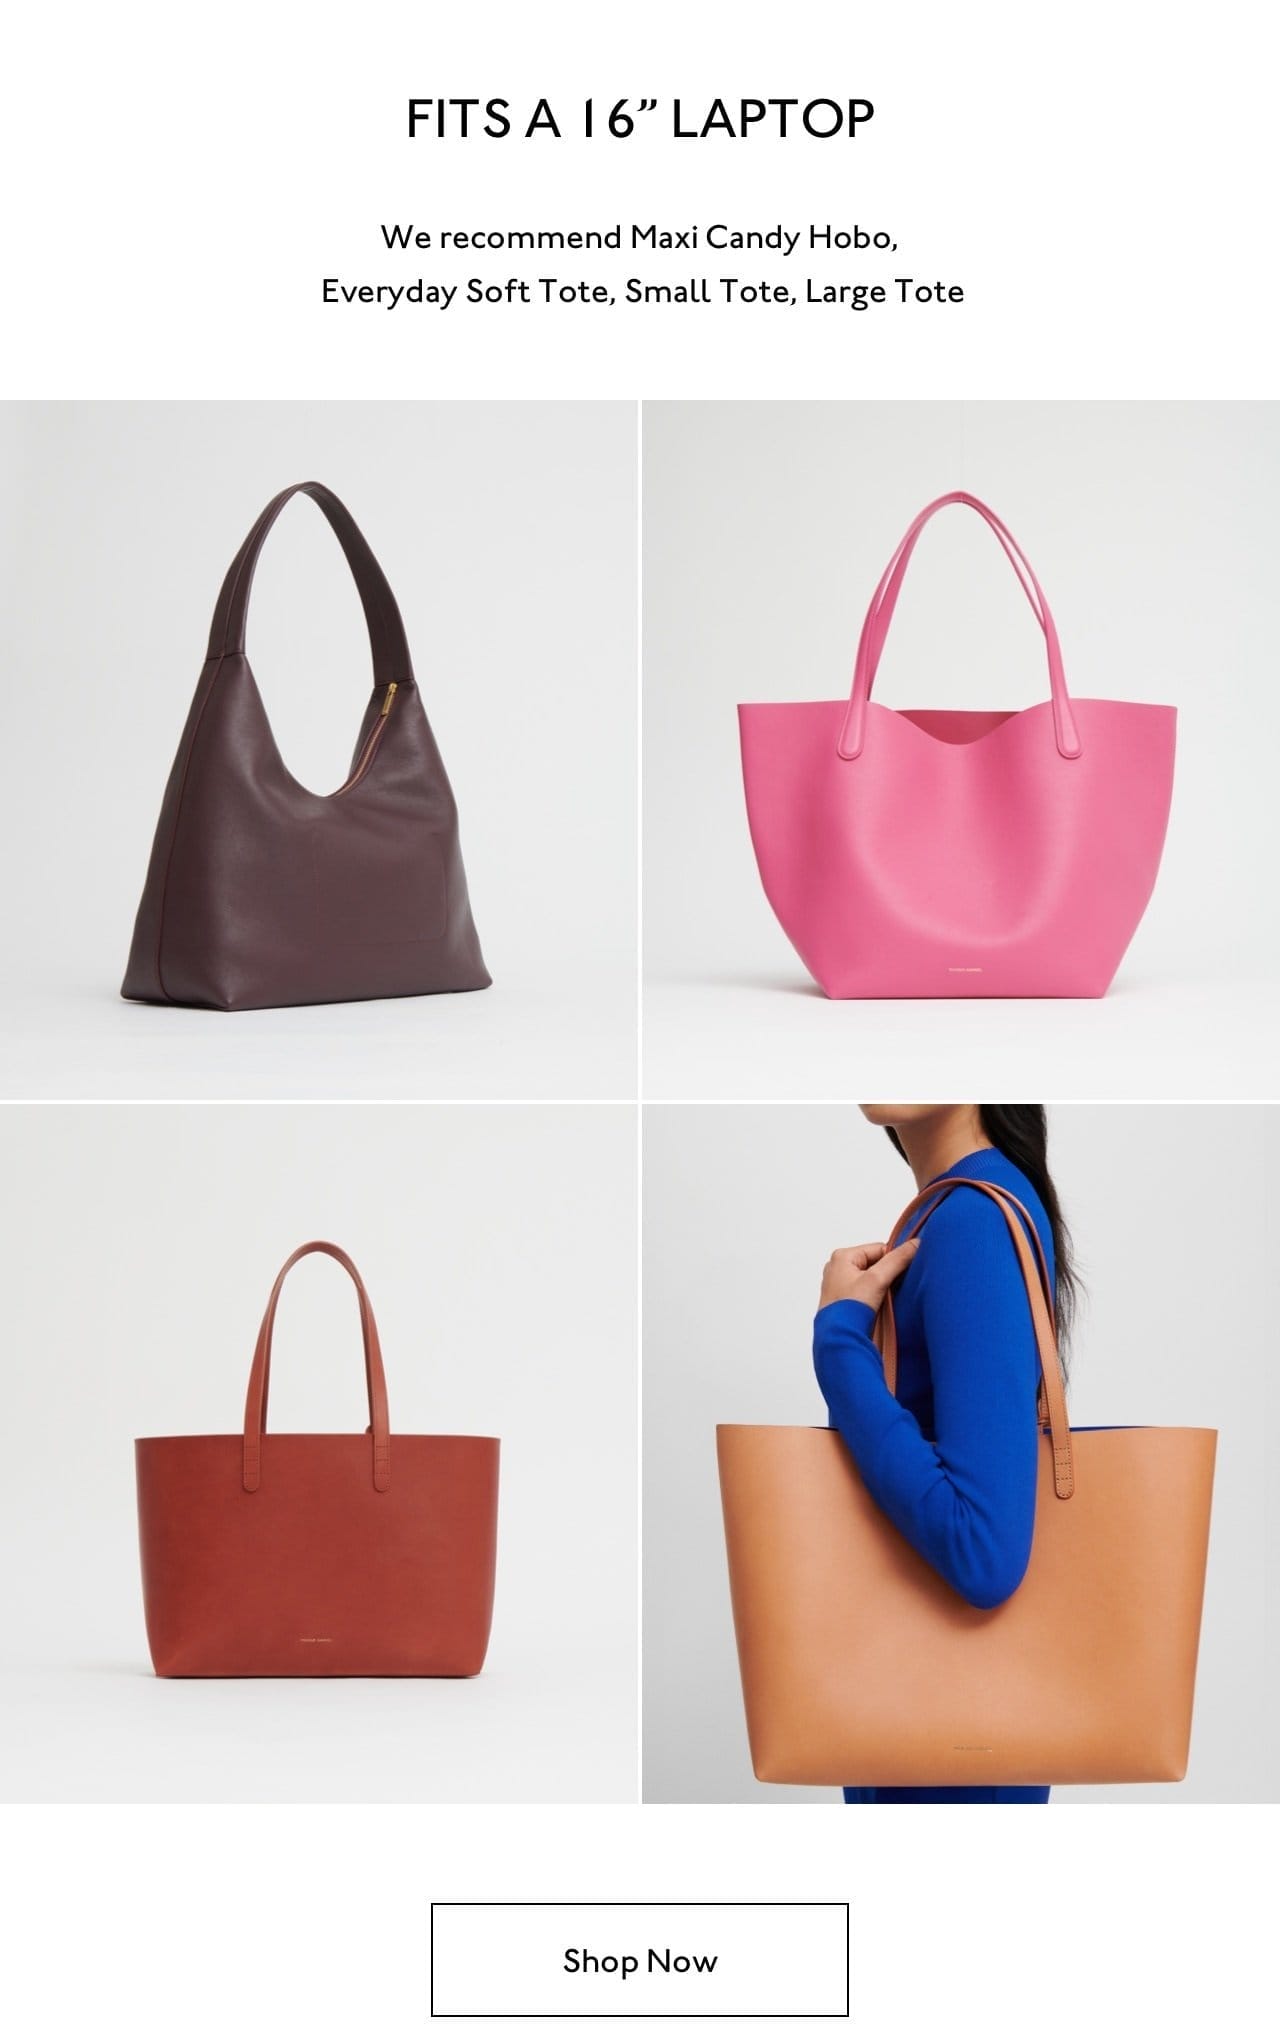 Fits a 16" laptop. We recommend Maxi Candy Hobo, Everyday Sot Tote, Small Tote, Large Tote.